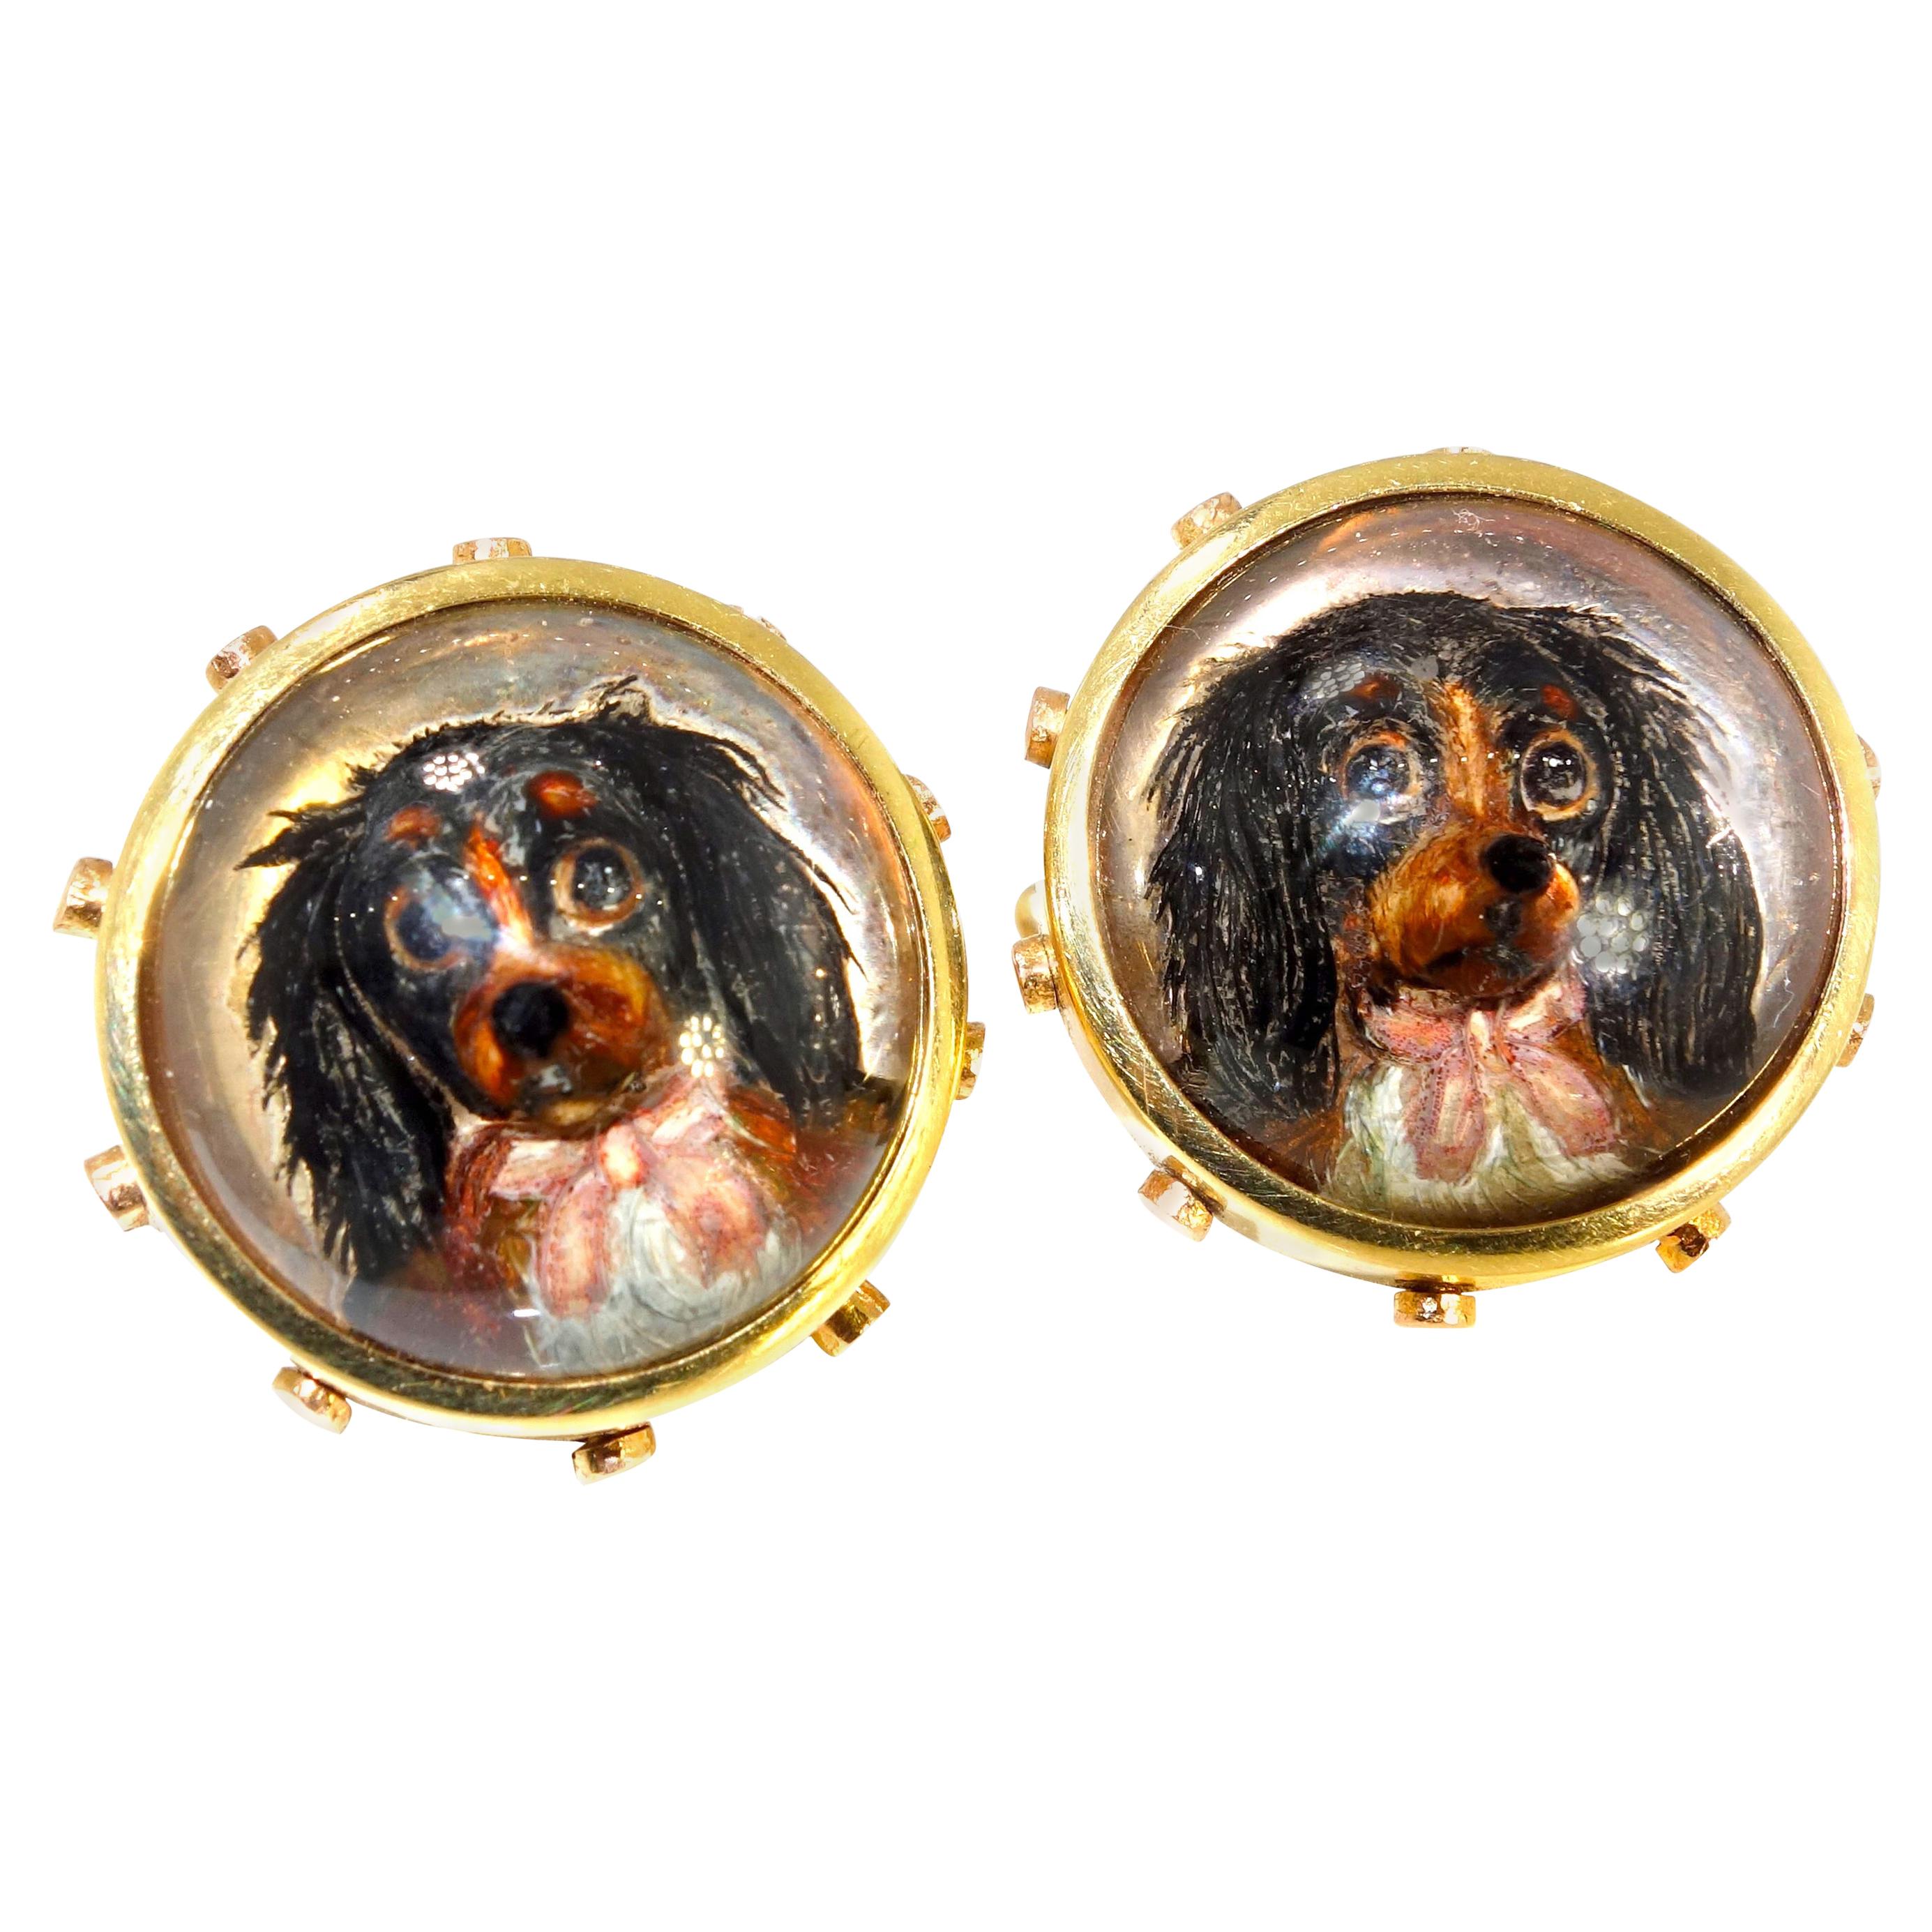 Antique Gold Reverse Painting on Crystal Cufflinks